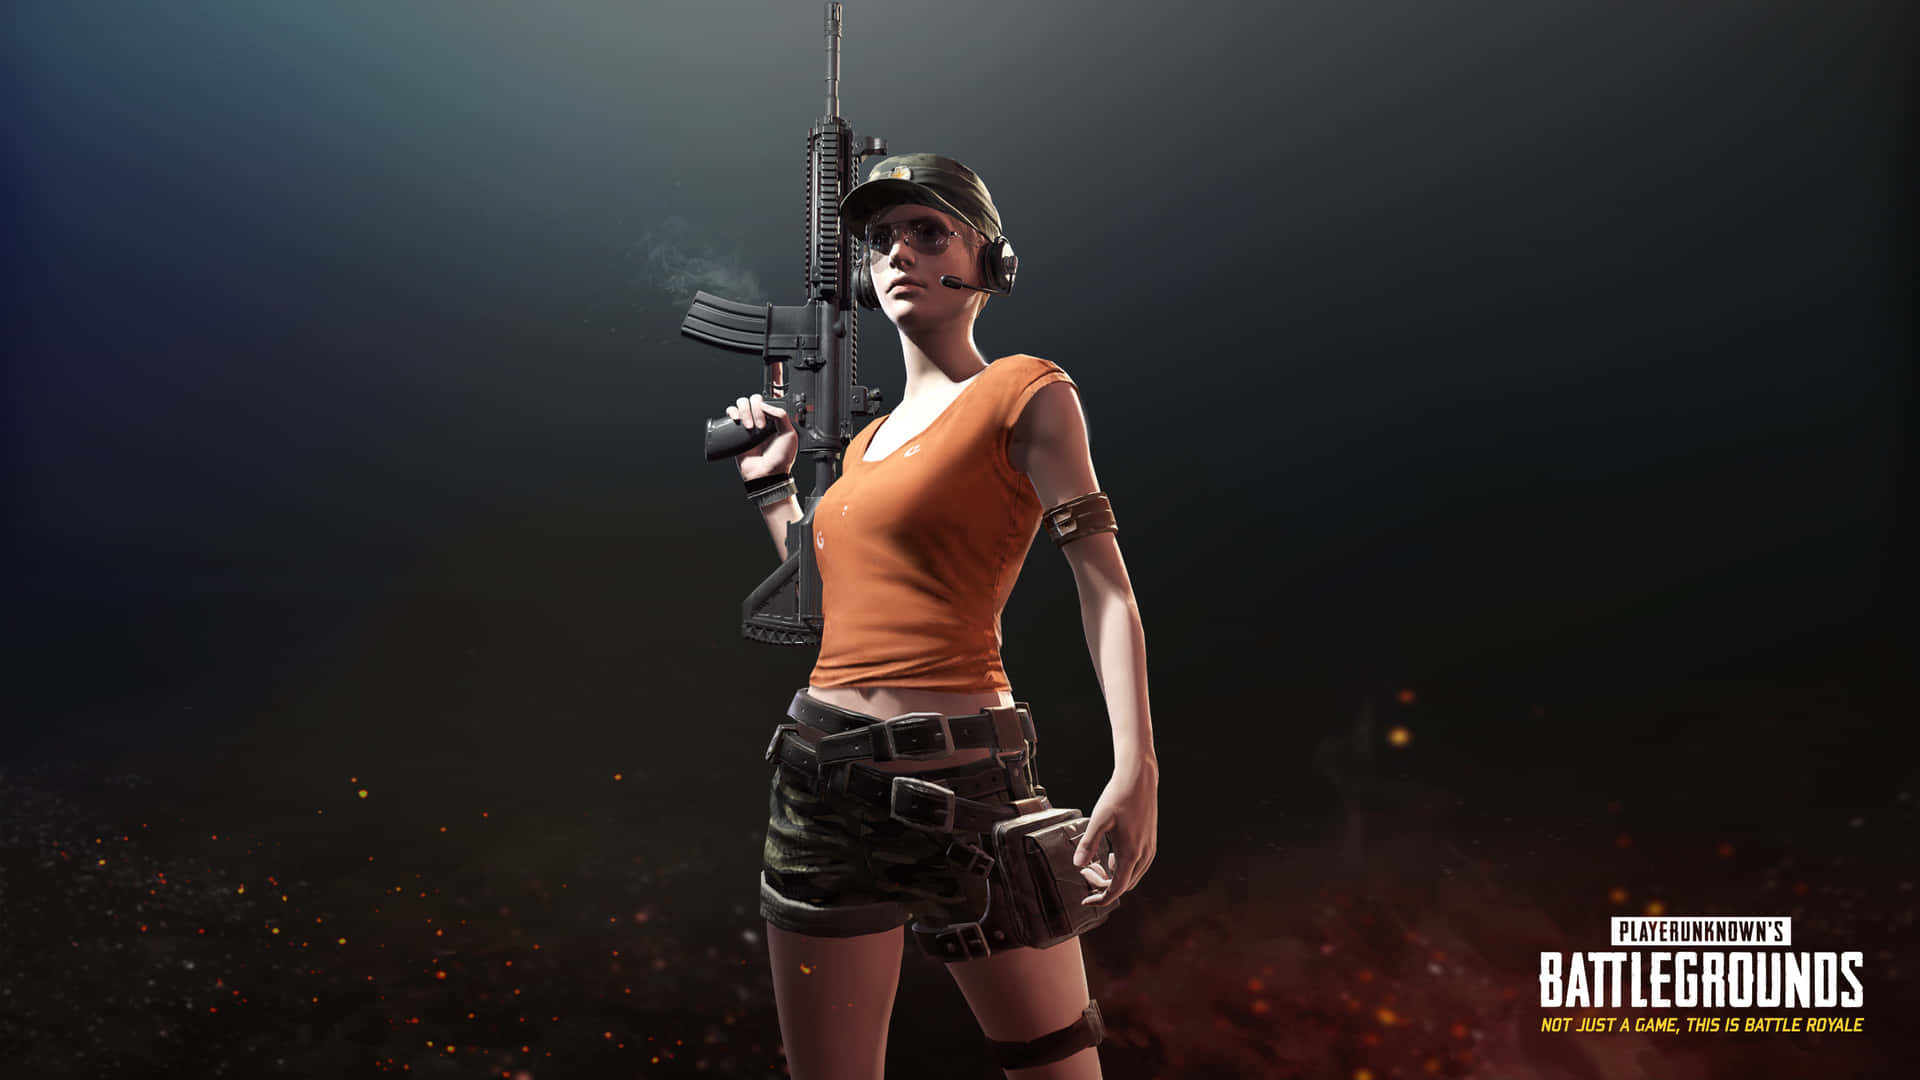 Player Unknown Battlegrounds Female Character With Gun Wallpaper